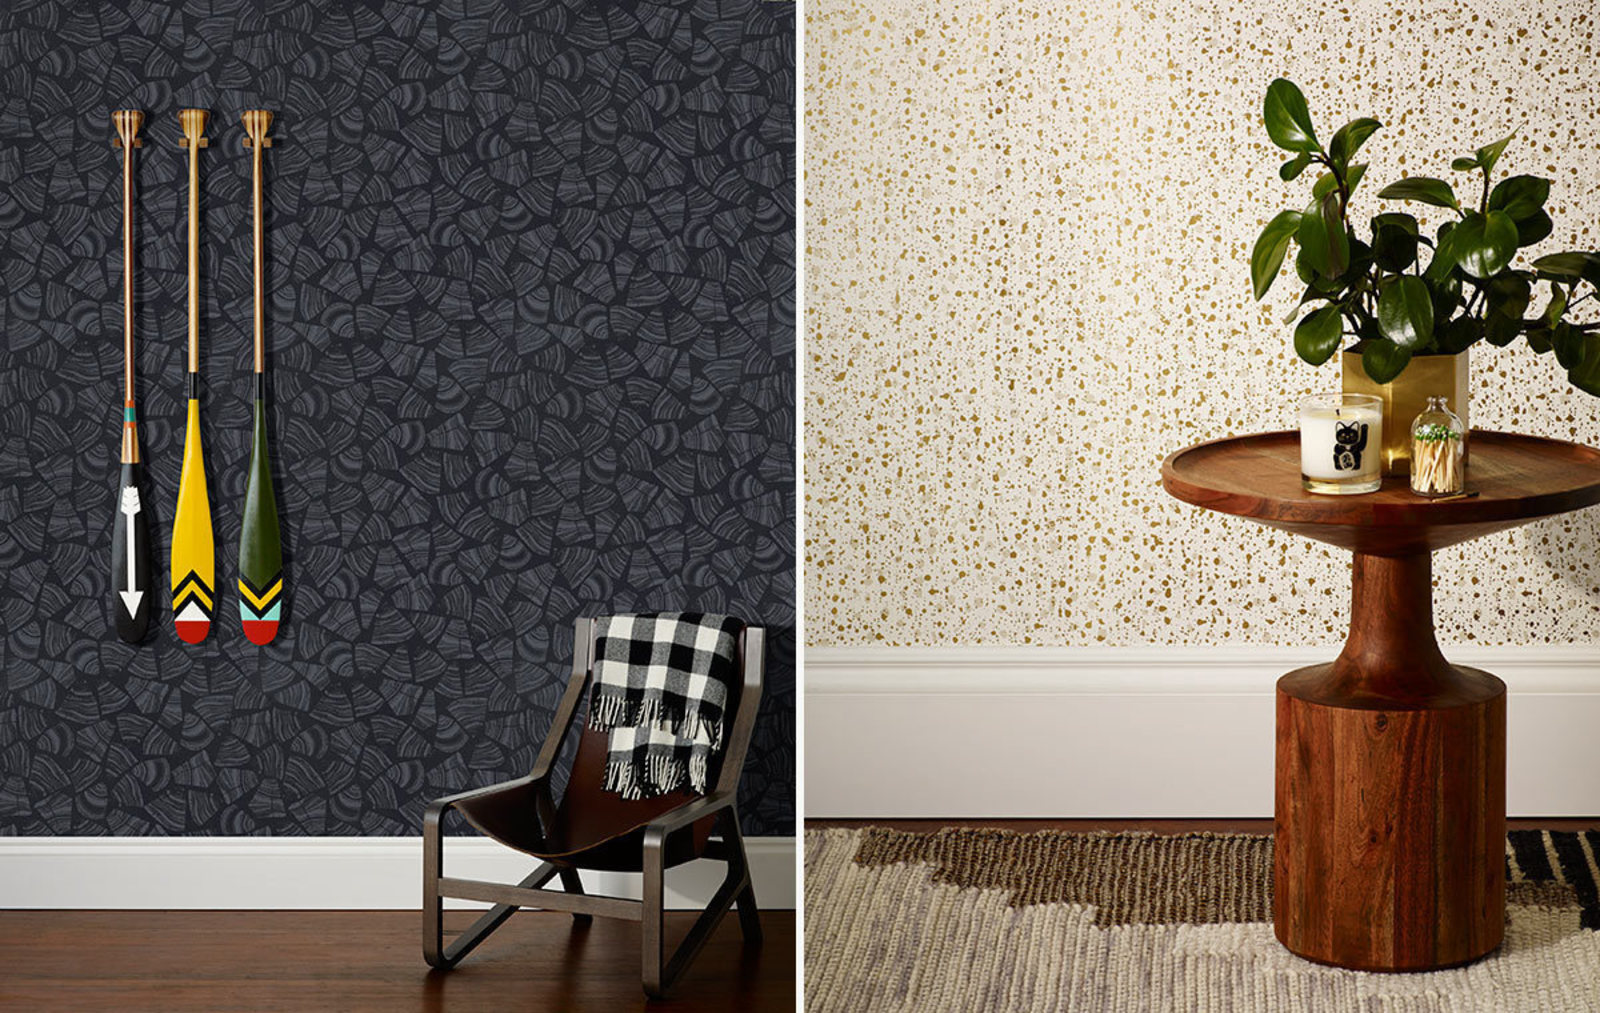 Askov Finlayson Hygge West Wallpaper Cool Hunting